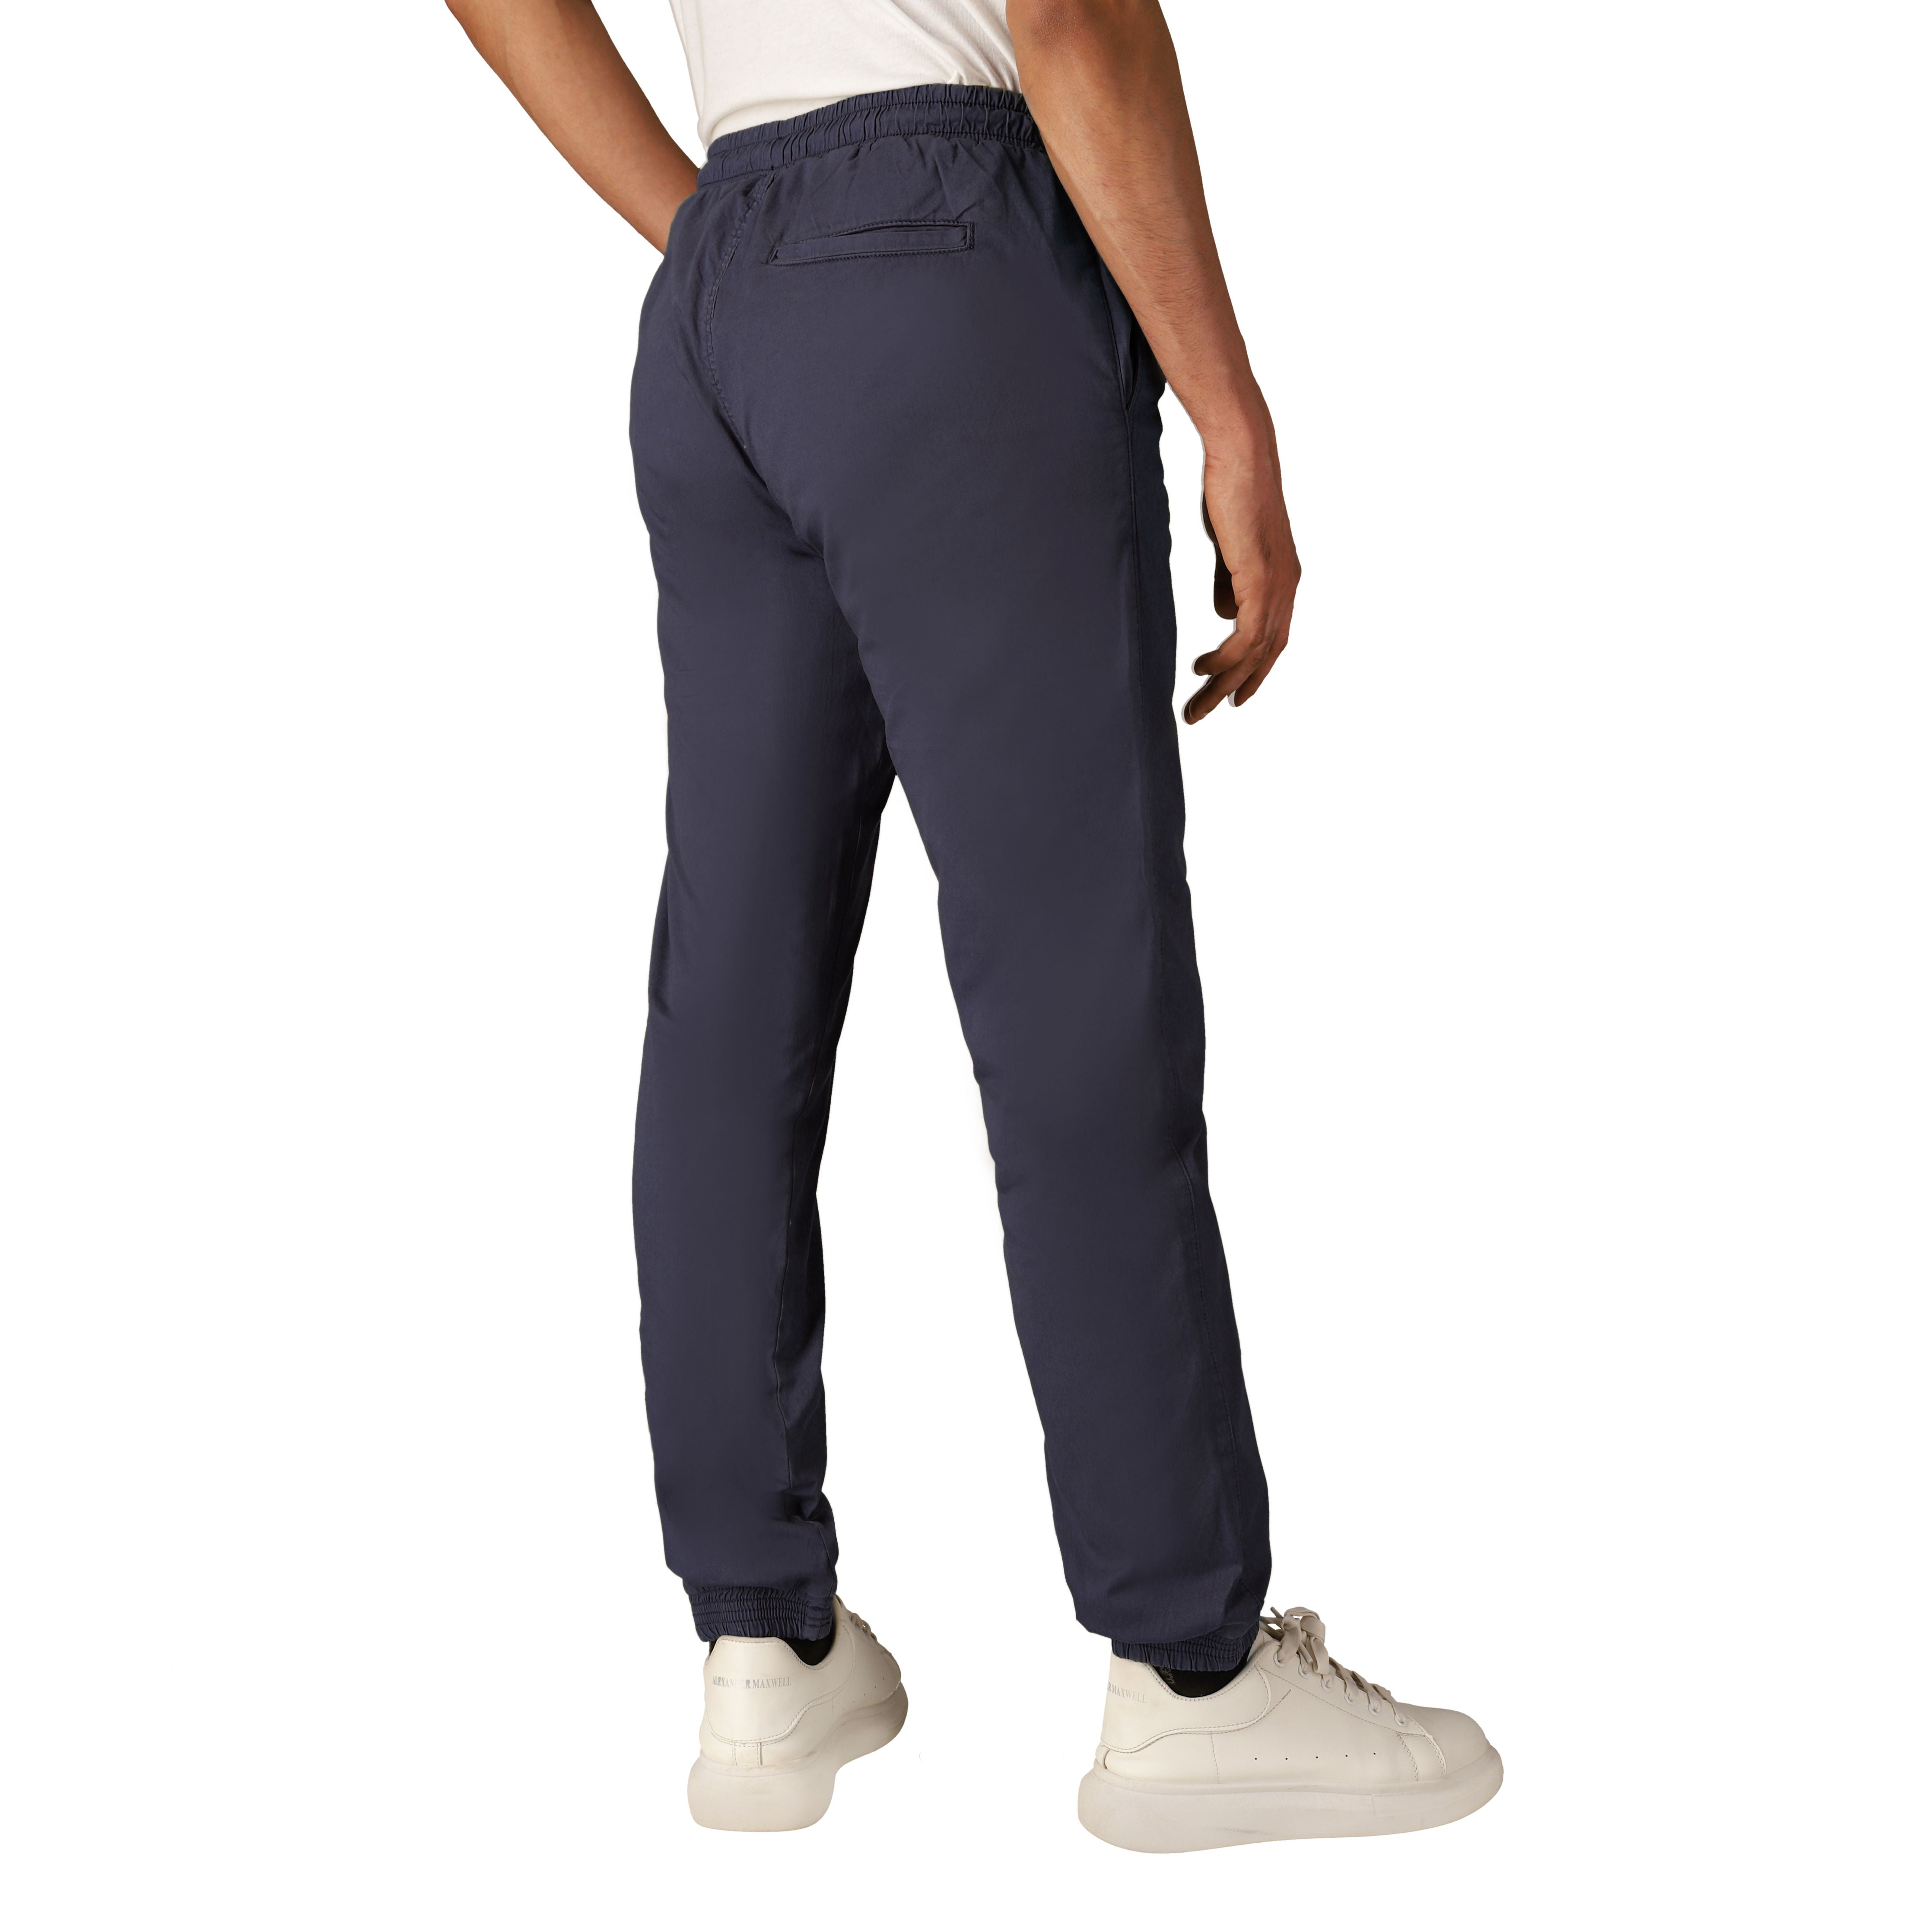 Shop Men's Skinny Joggers at Avalon Supply Co